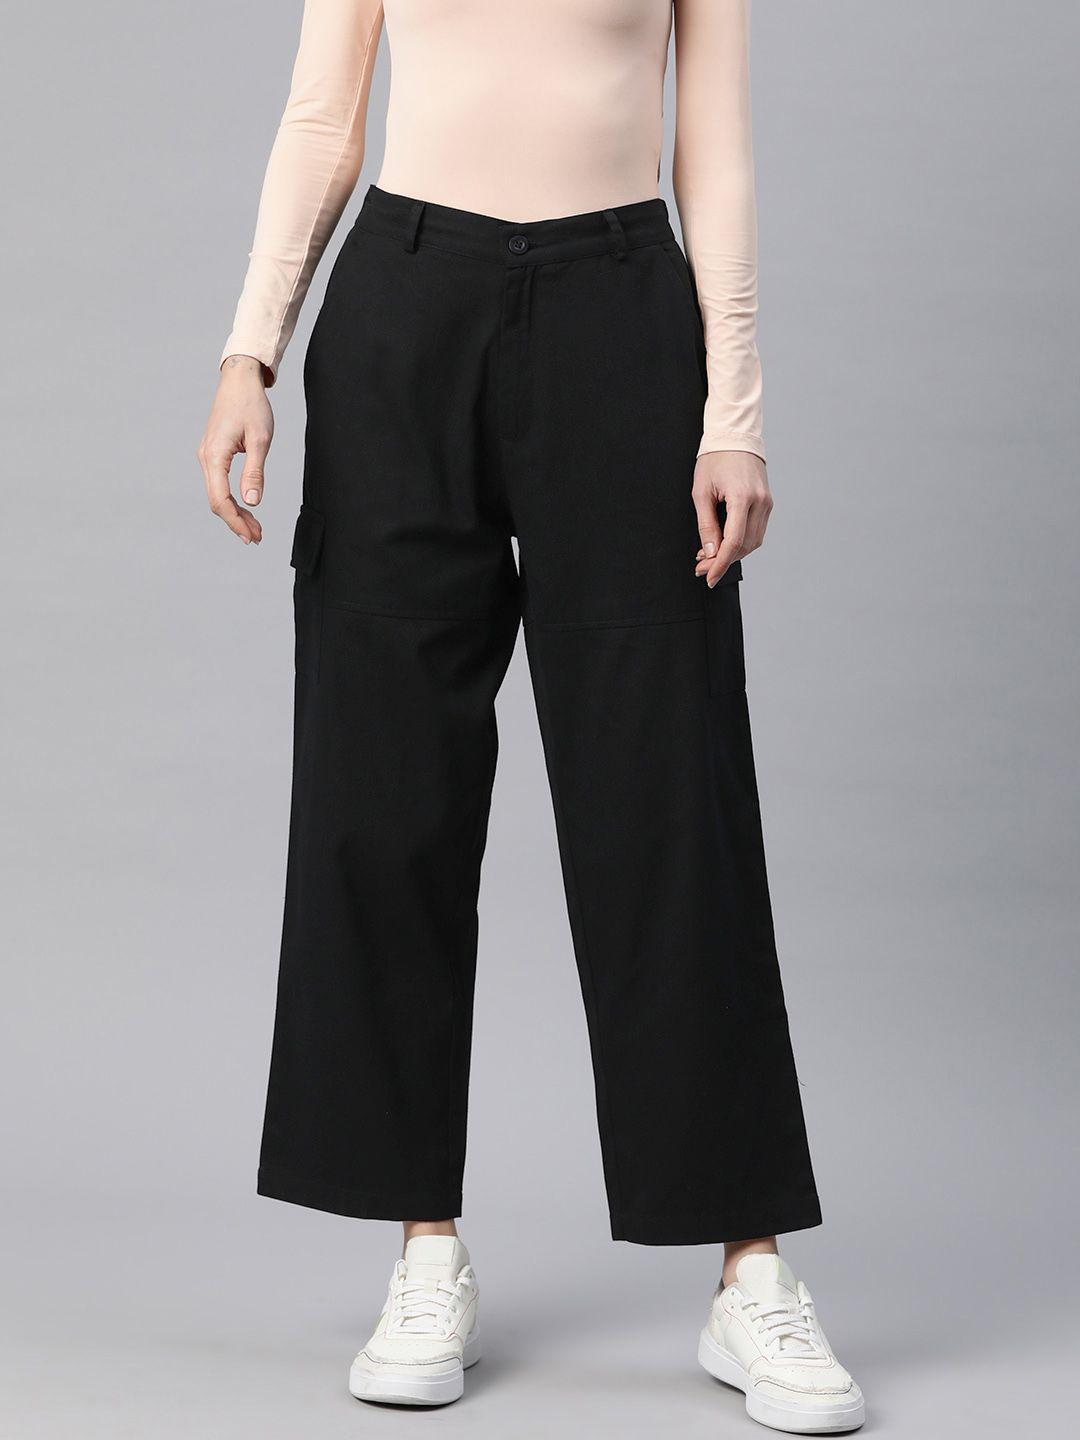 popnetic flat-front high-rise pure cotton cargos